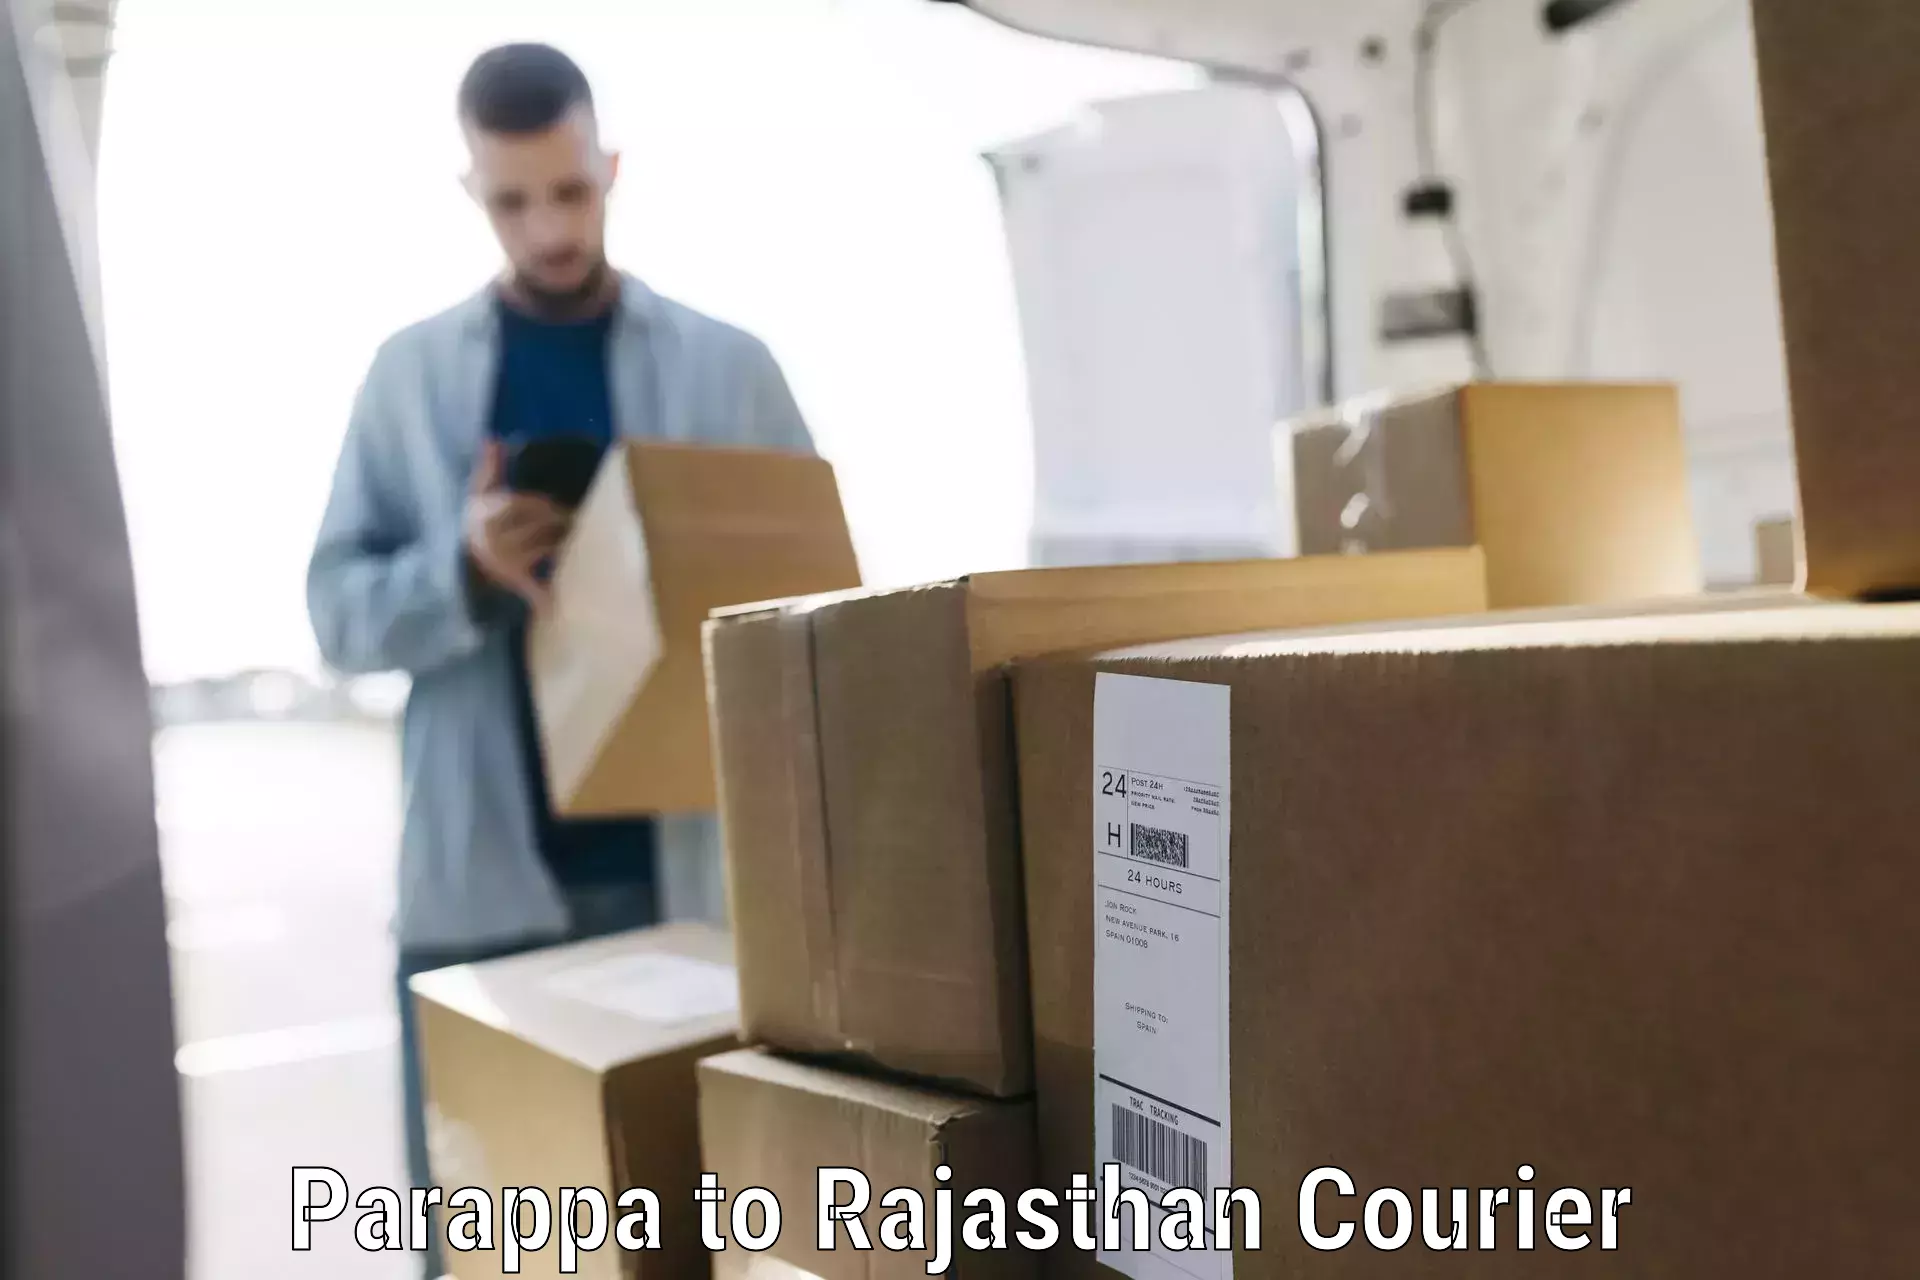 Airport luggage delivery Parappa to Pratapgarh Rajasthan